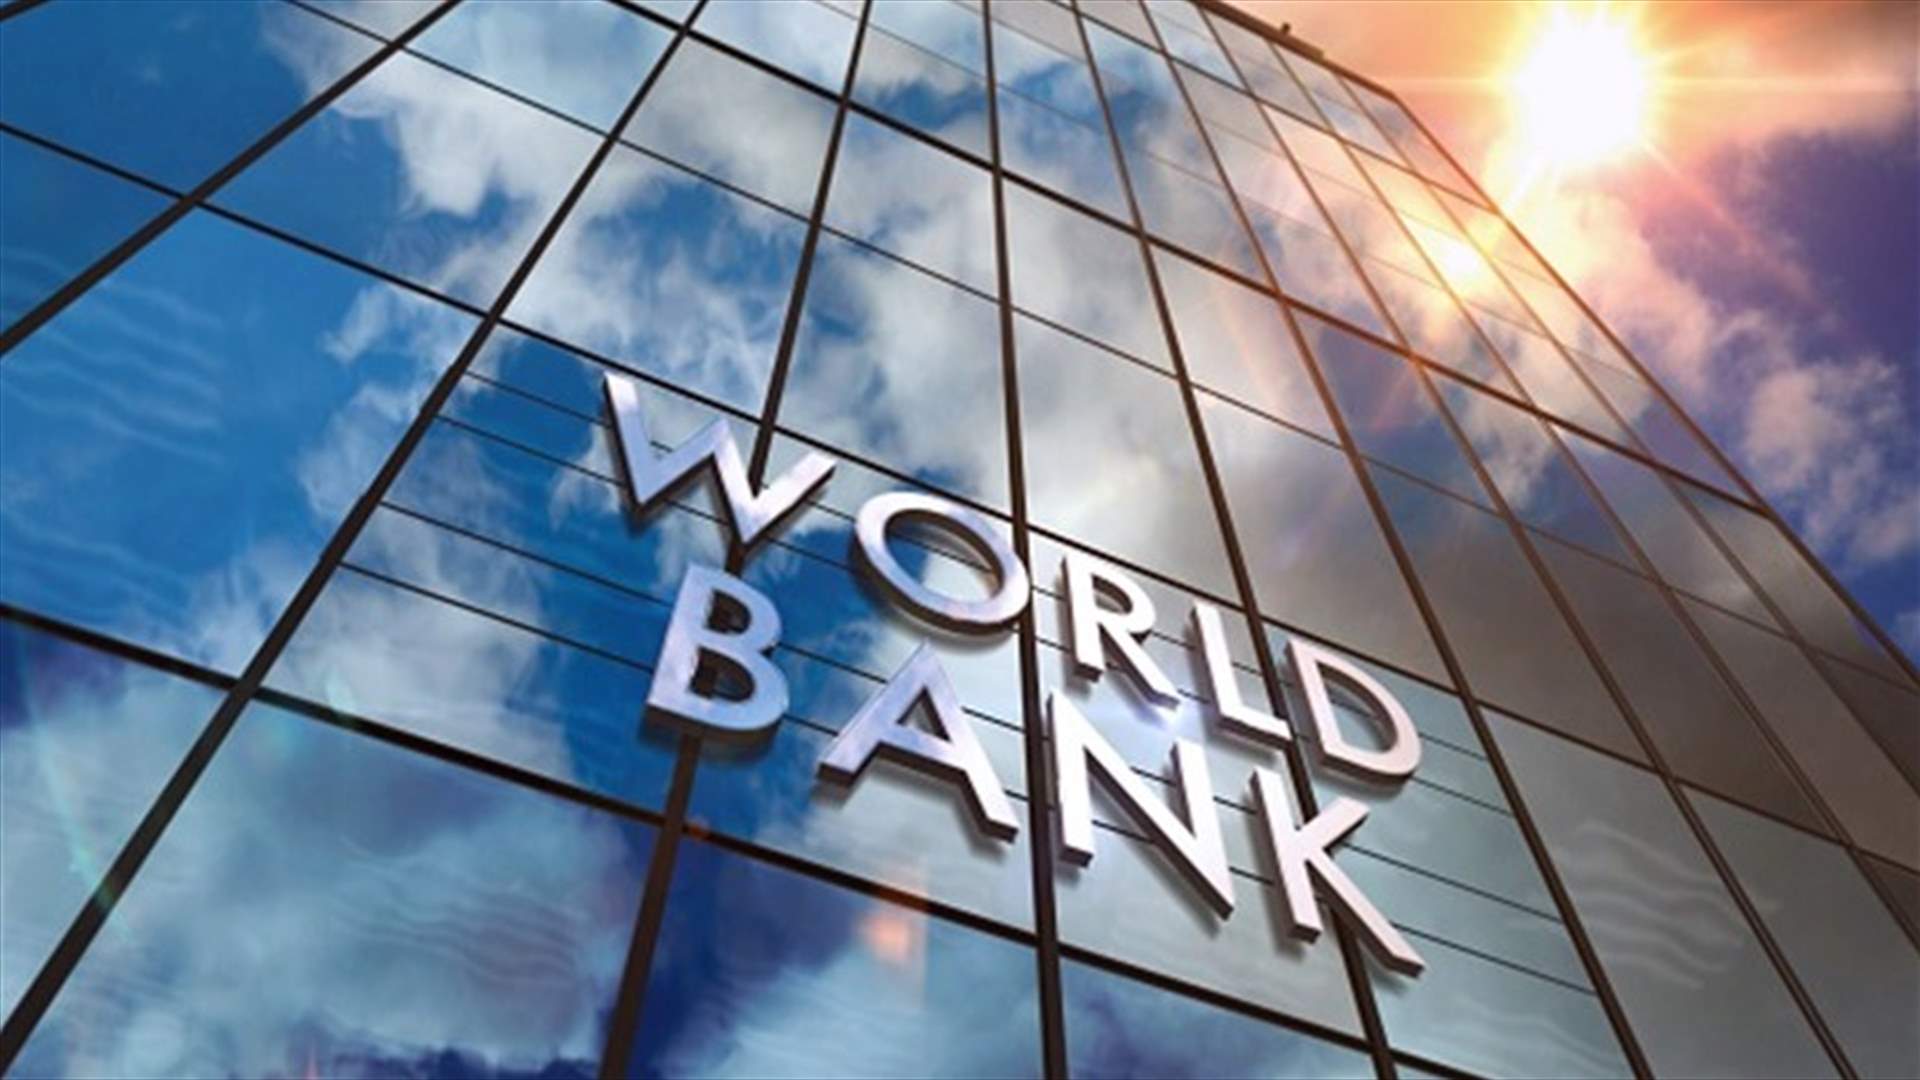 What did World Bank inform Finance and Budget Committee&#63;